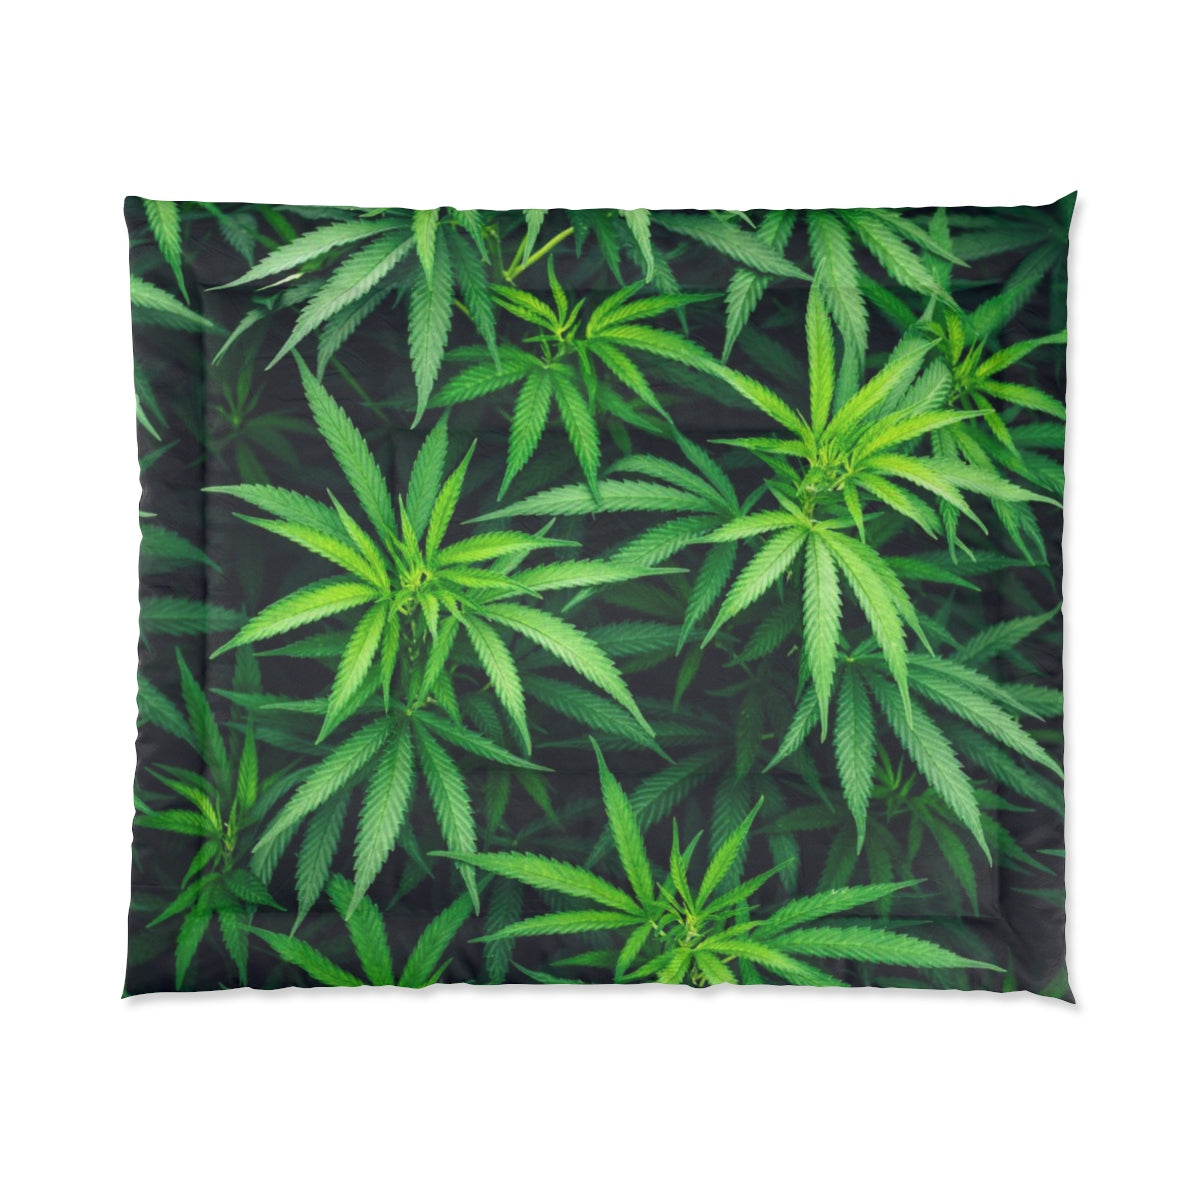 My Cannabis Custom Designed Comforter.  A Unique Cannabis Gift For Friends & Family. Cannabis Decor For Your Home. Cannabis Comforter